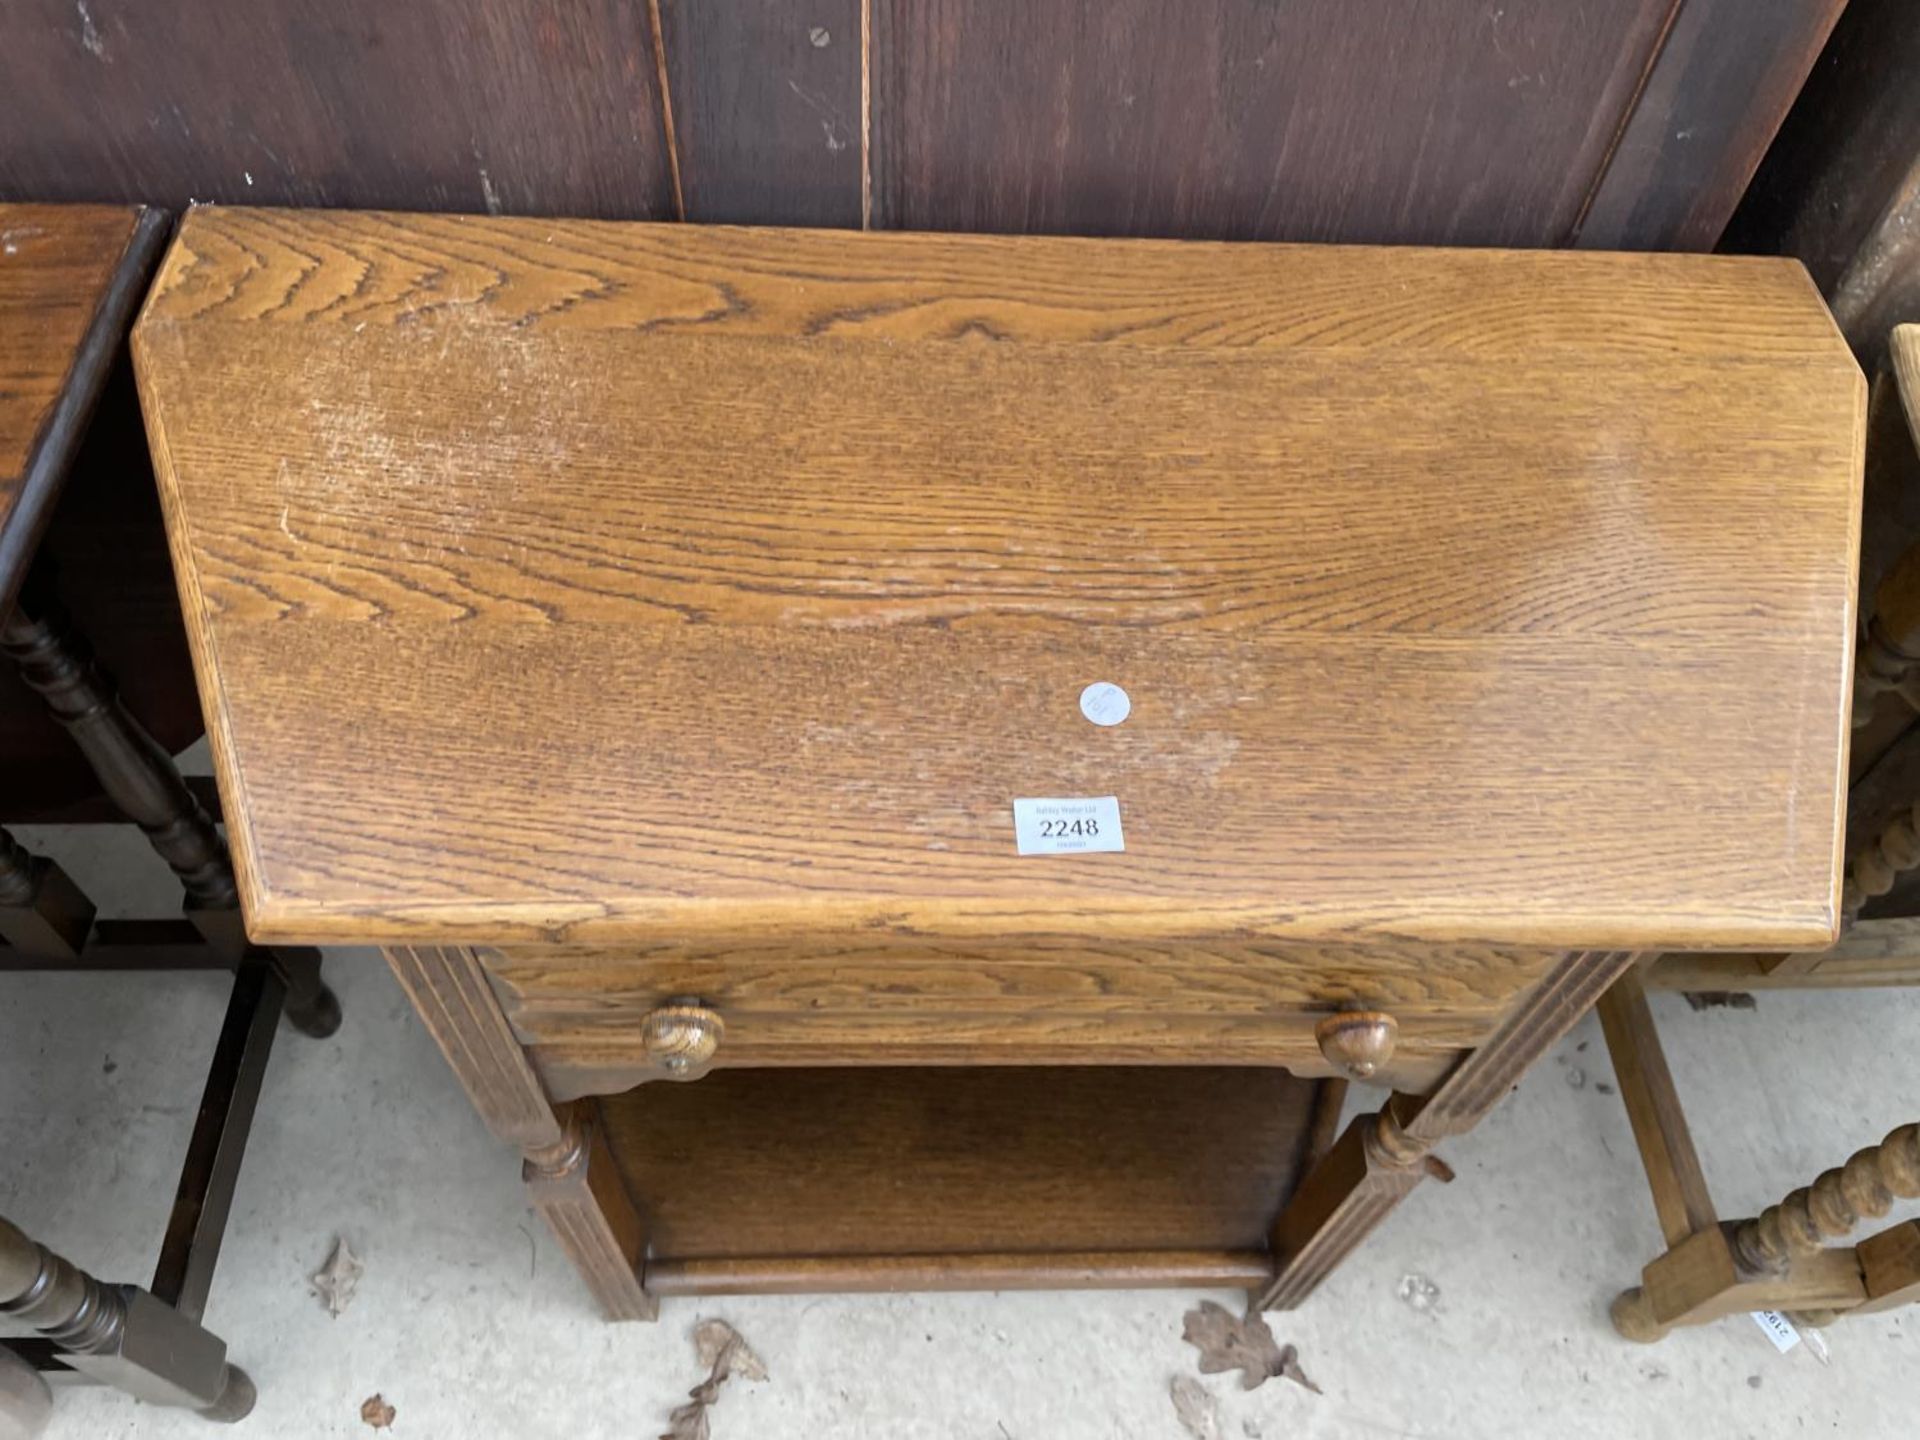 AN OAK JACOBEAN STYLE SIDE TABLE WITH SINGLE DRAWER, 31.5" WIDE - Image 2 of 3